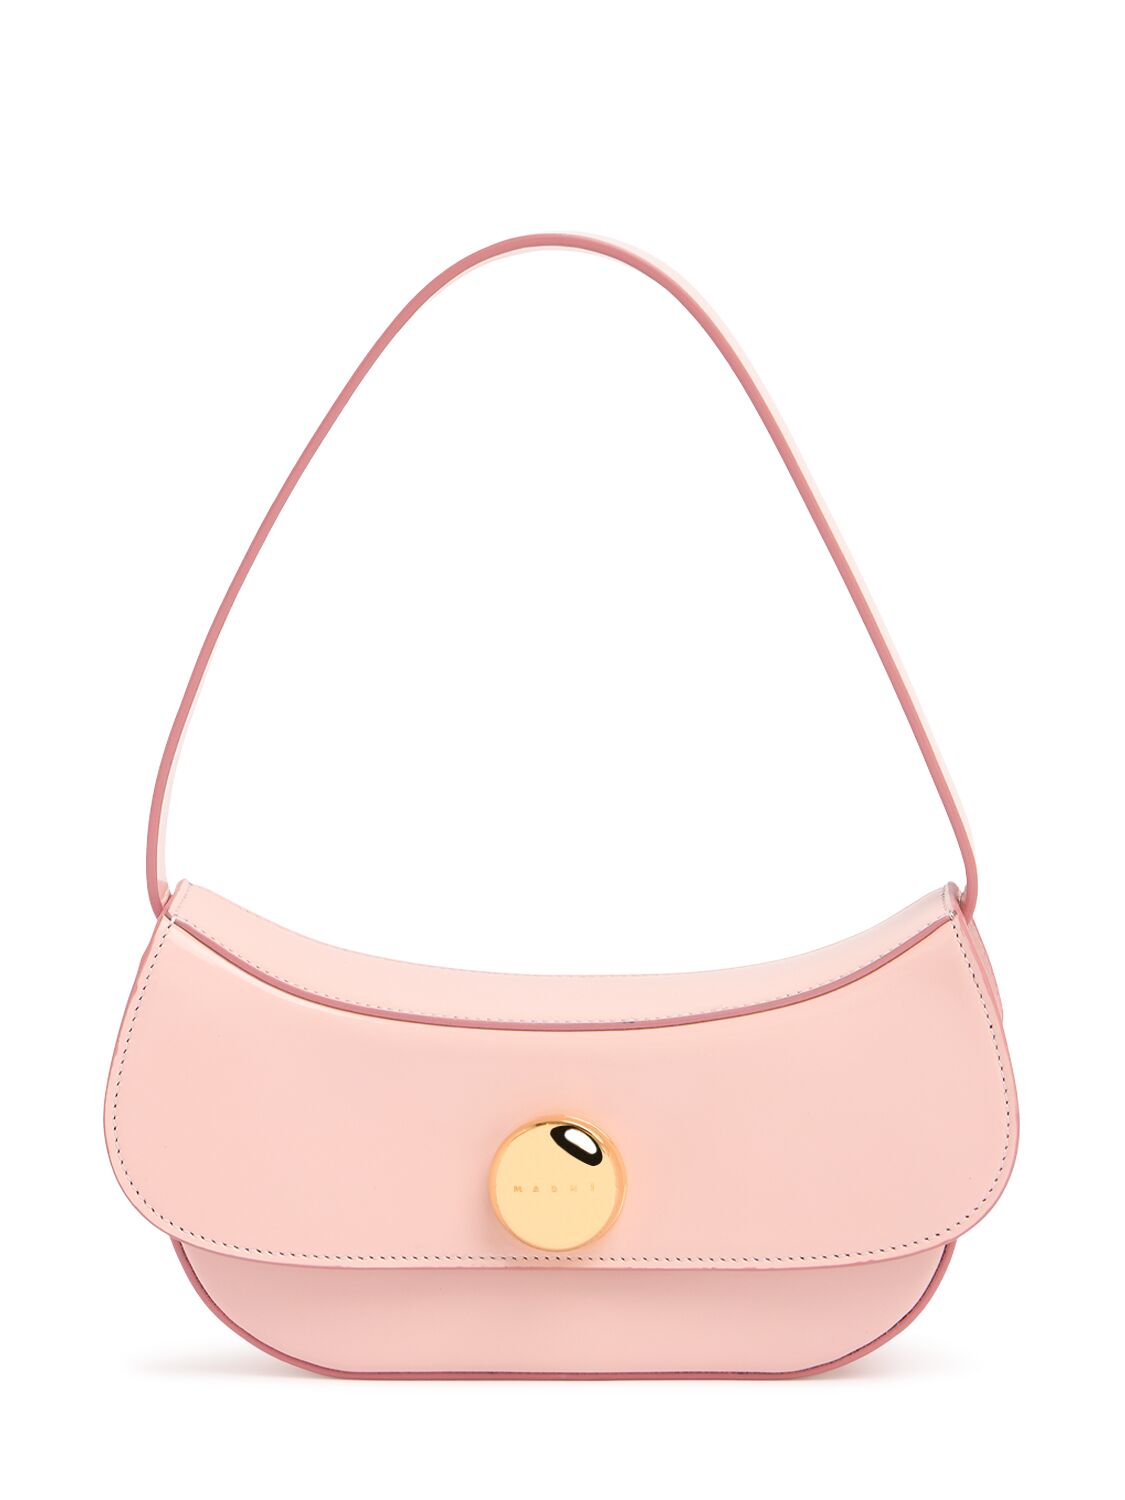 Marni Small Butterfly Leather Shoulder Bag In Antique Rose